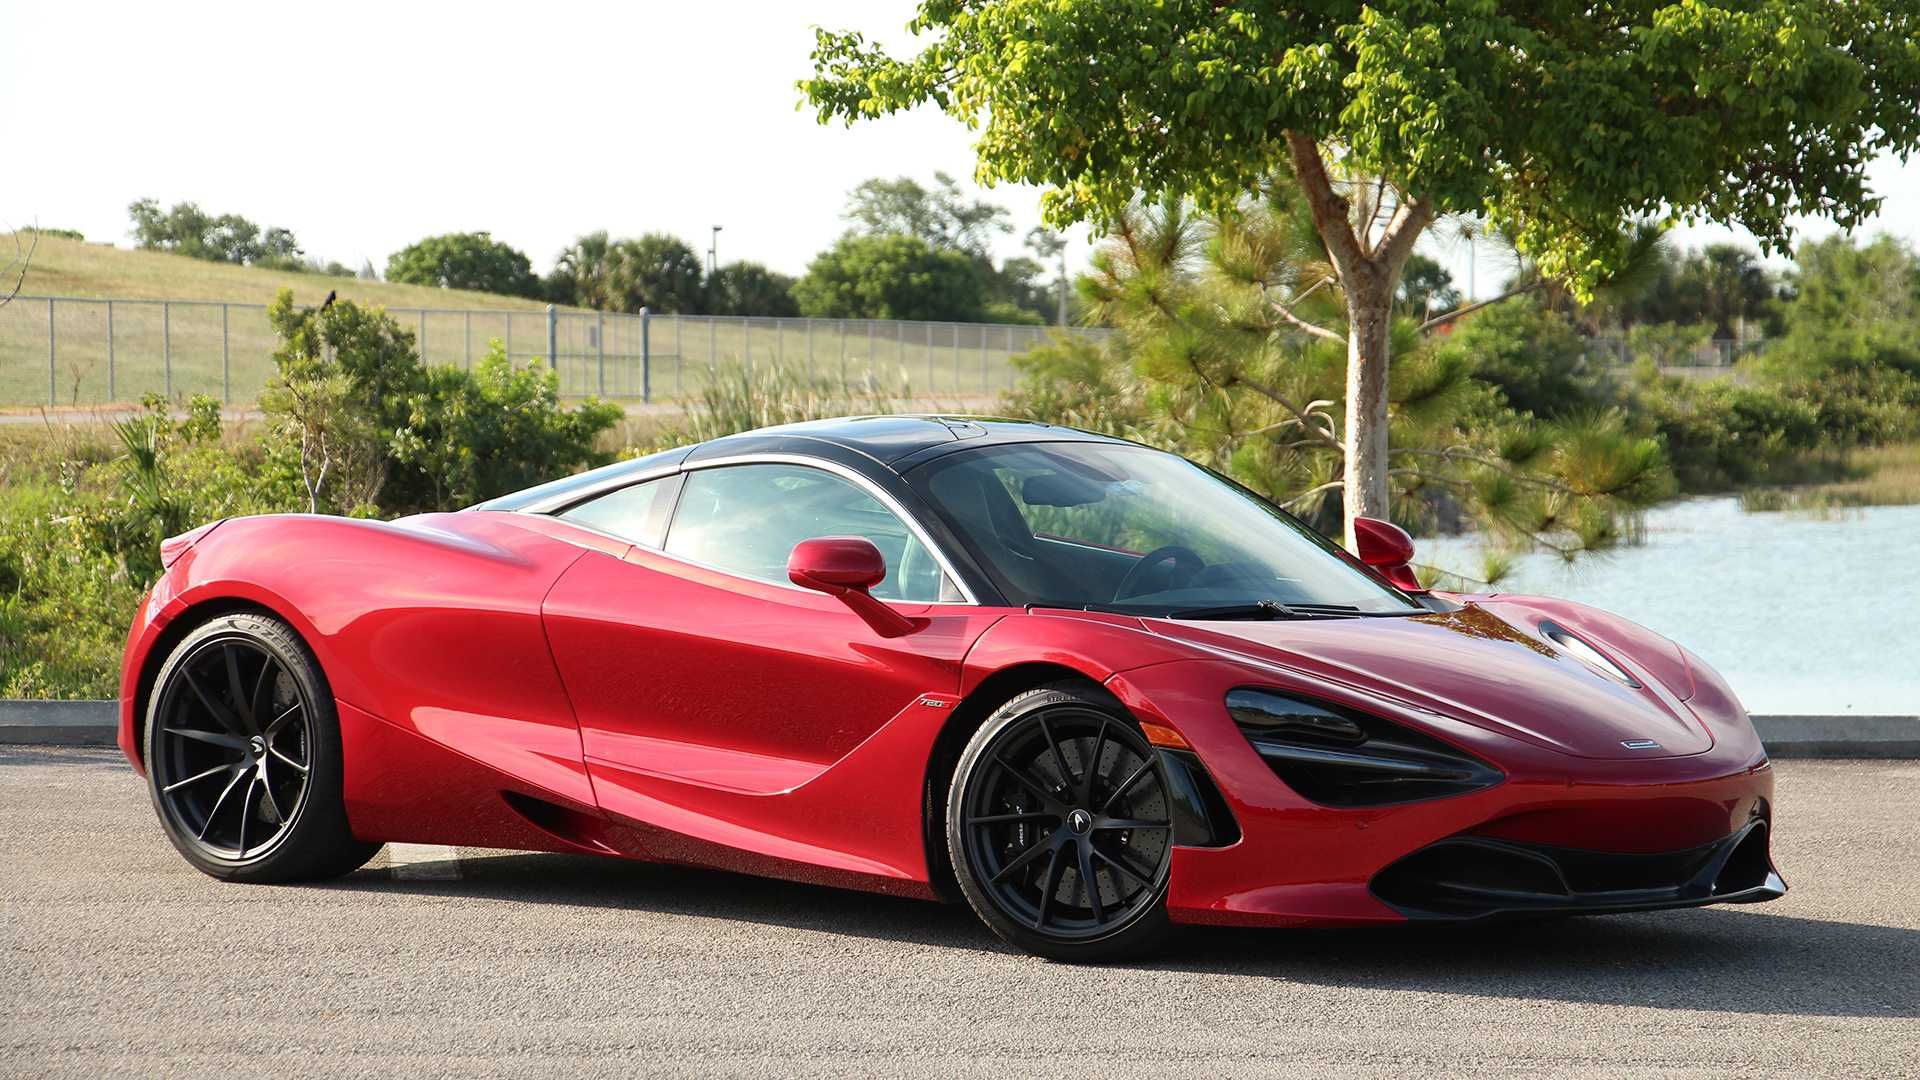 McLaren 720S Coupe parked outside